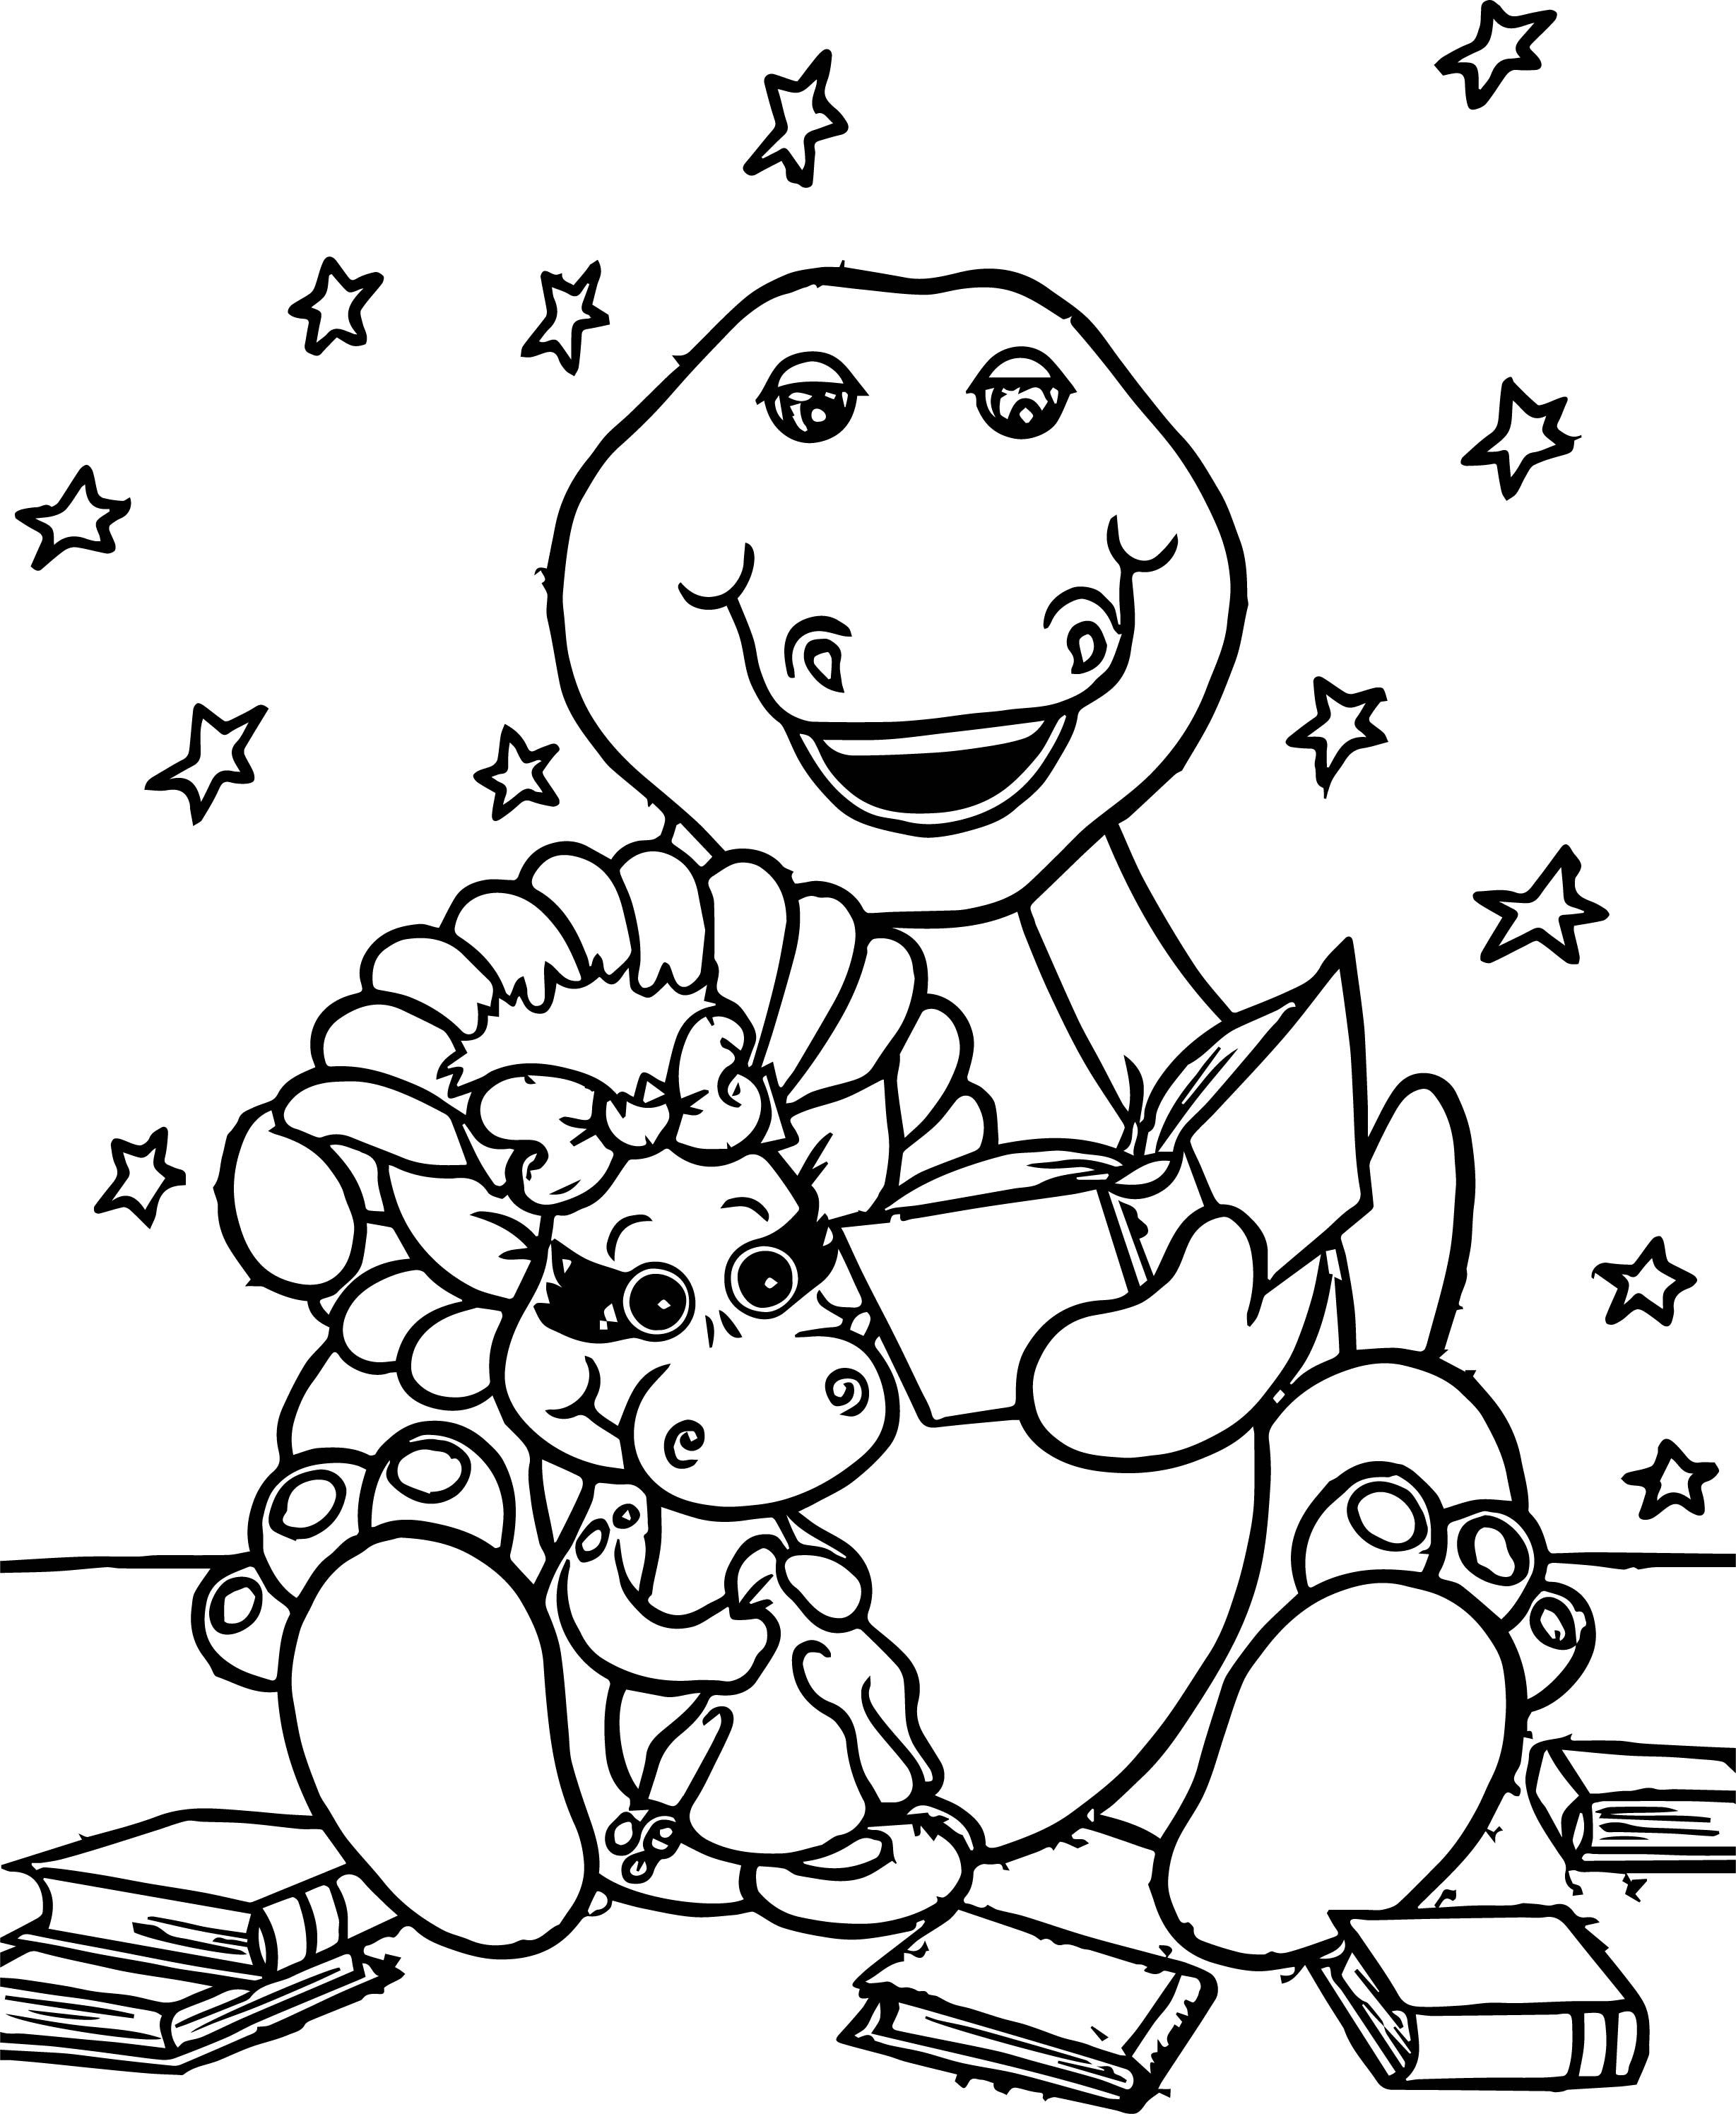 awesome Barney Reads To Baby Bop Coloring Page | Coloring pages ...